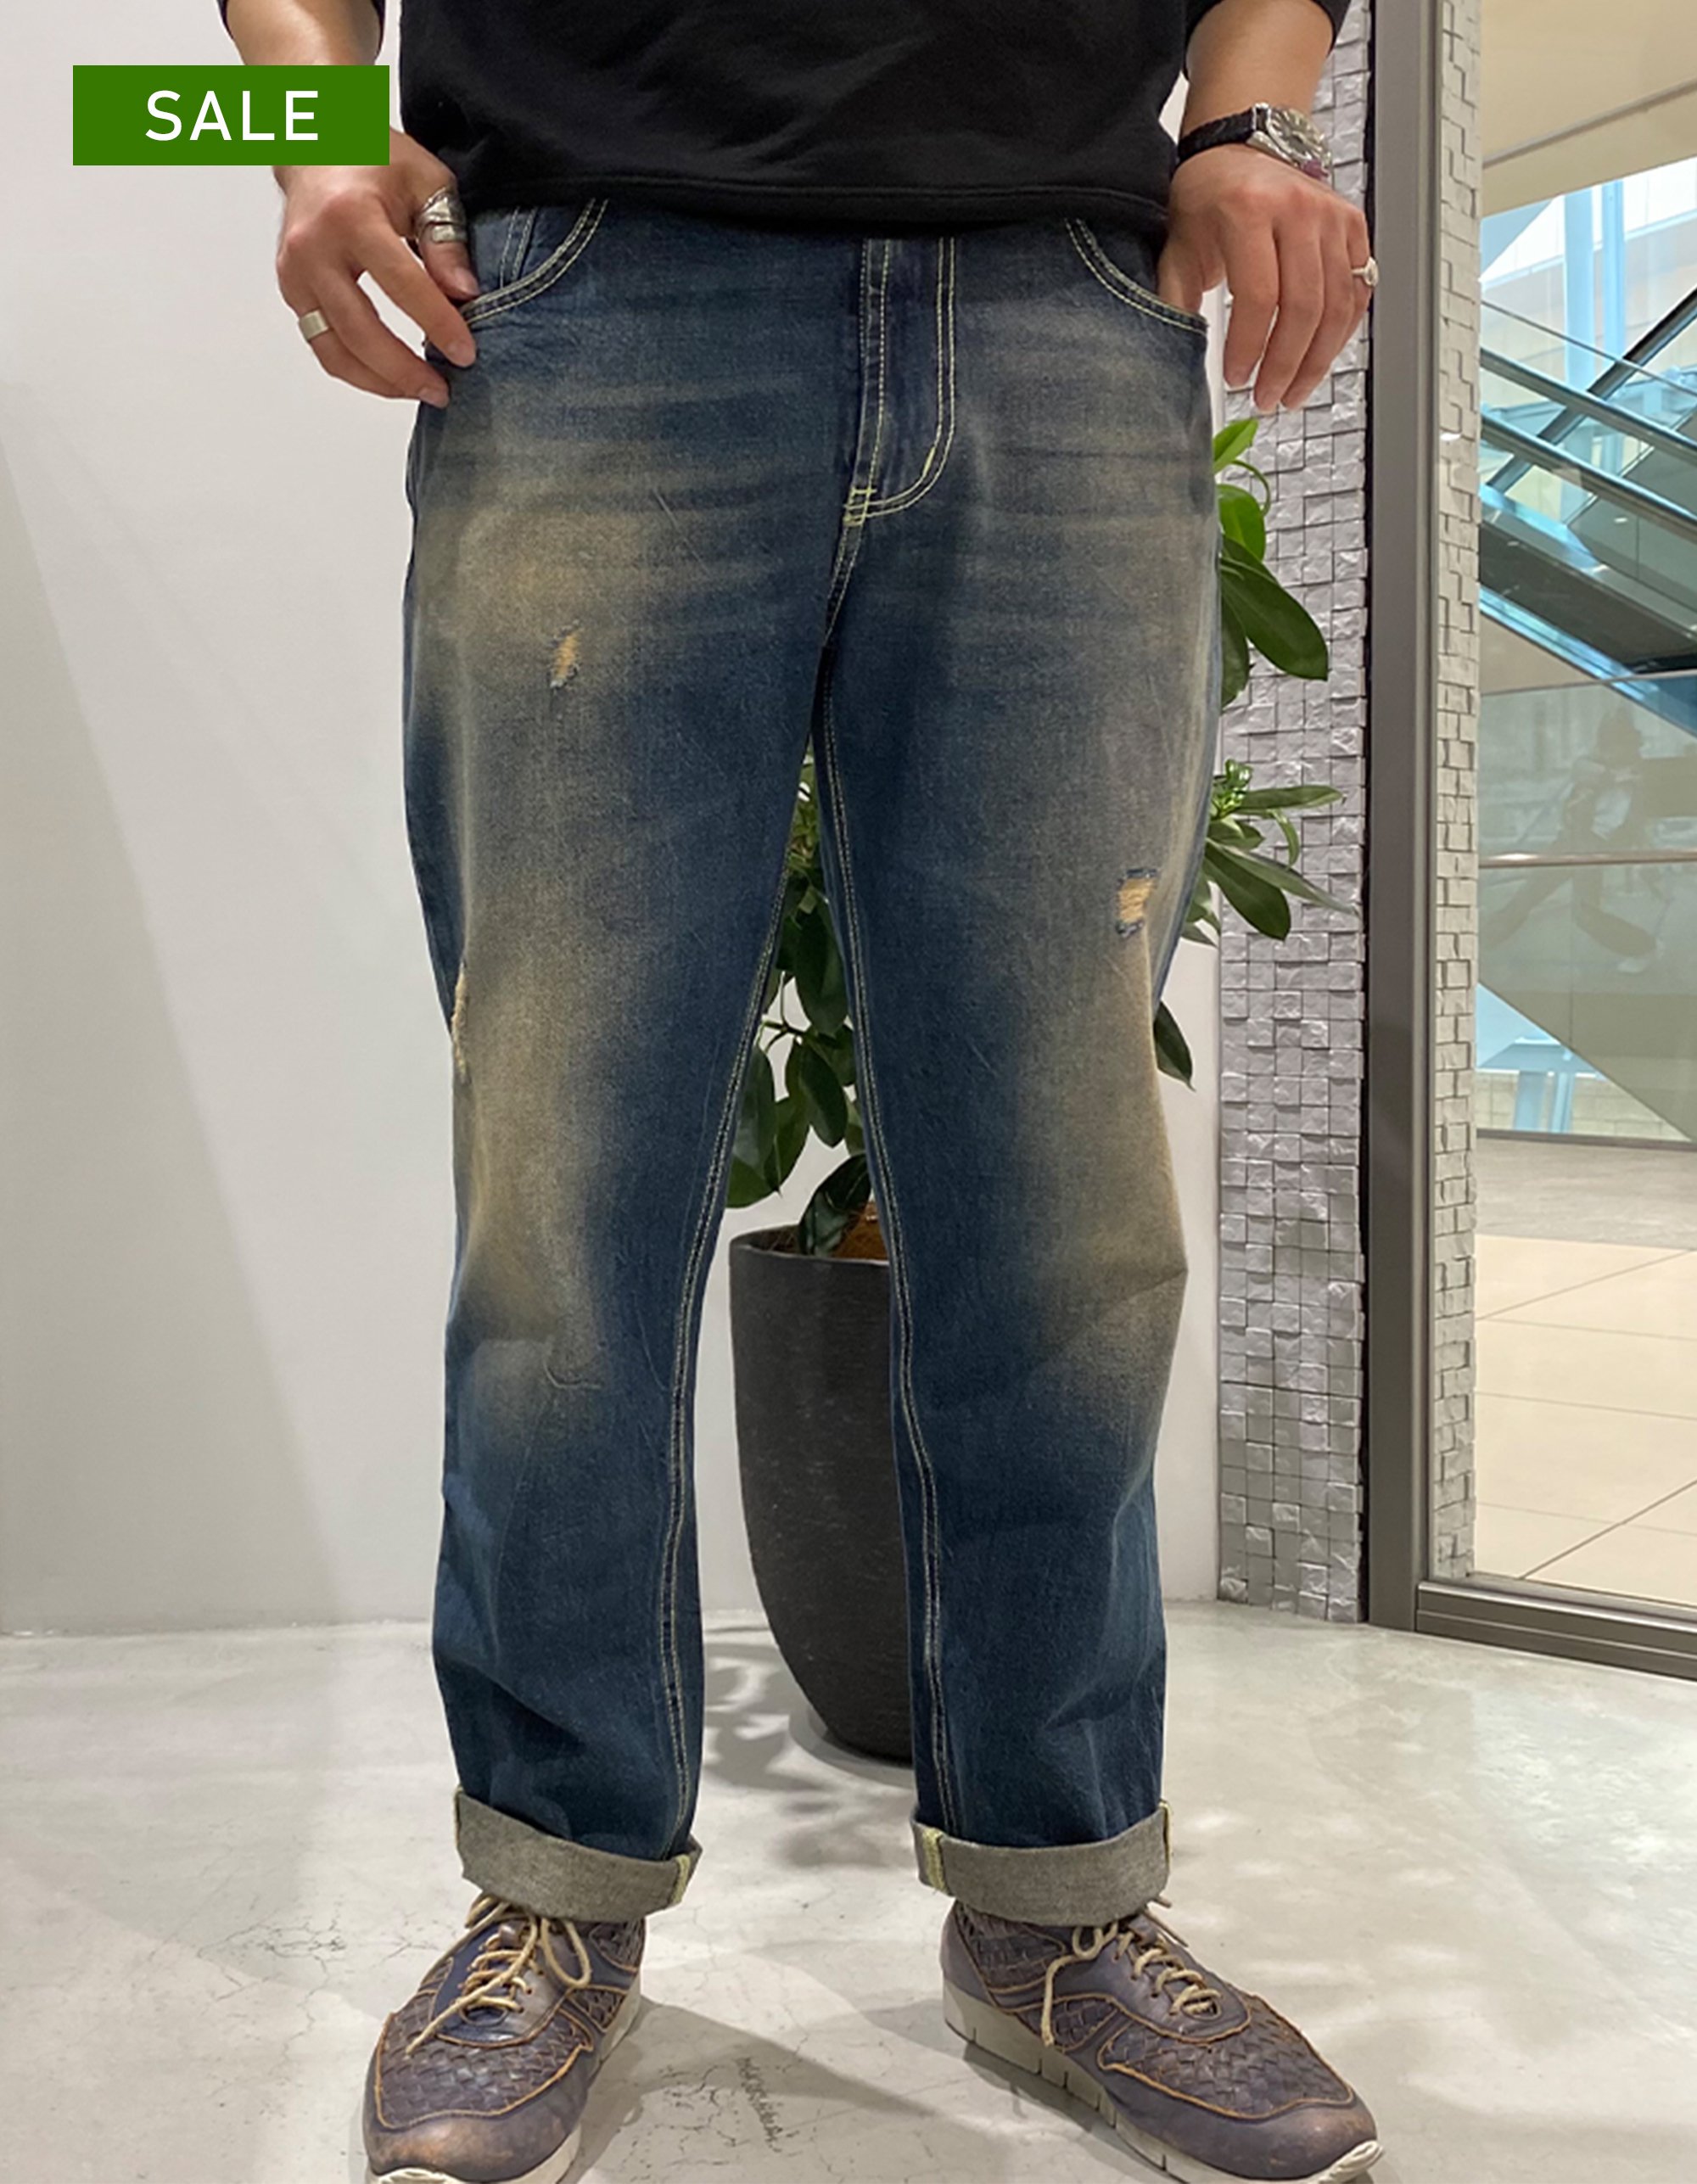 【DONDUP】loose-fit selvedge denim<img class='new_mark_img2' src='https://img.shop-pro.jp/img/new/icons20.gif' style='border:none;display:inline;margin:0px;padding:0px;width:auto;' />